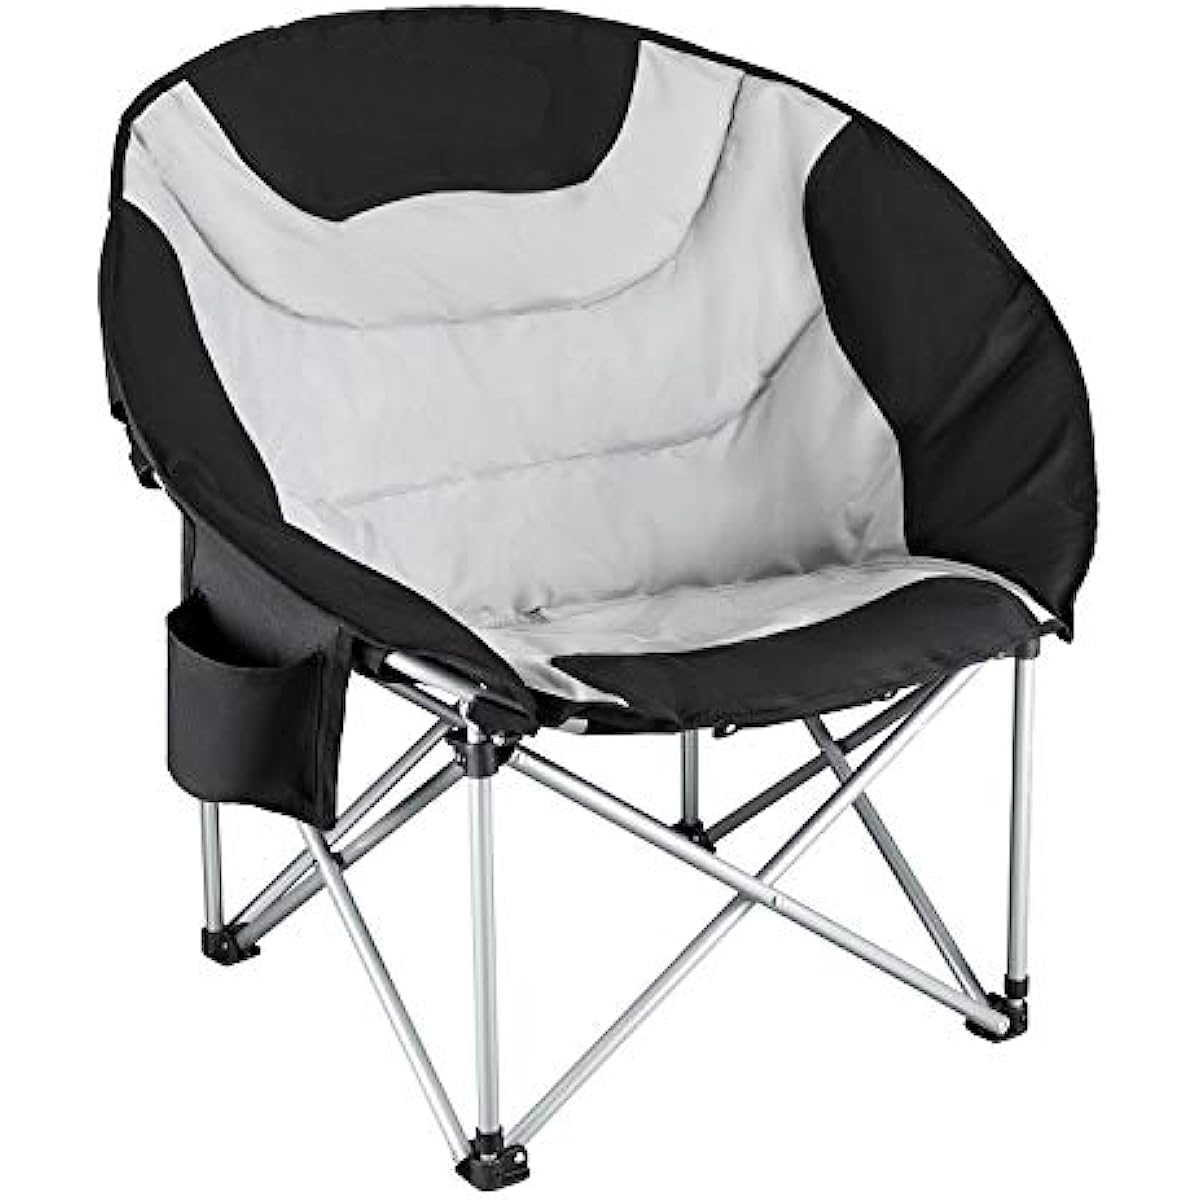 

Moon Saucer Camping Large Padded Folding Portable Heavy Duty Comfy Sofa Chair Supports 300lbs with Cup Holder and Carry Bag for Lawn Patio Sports